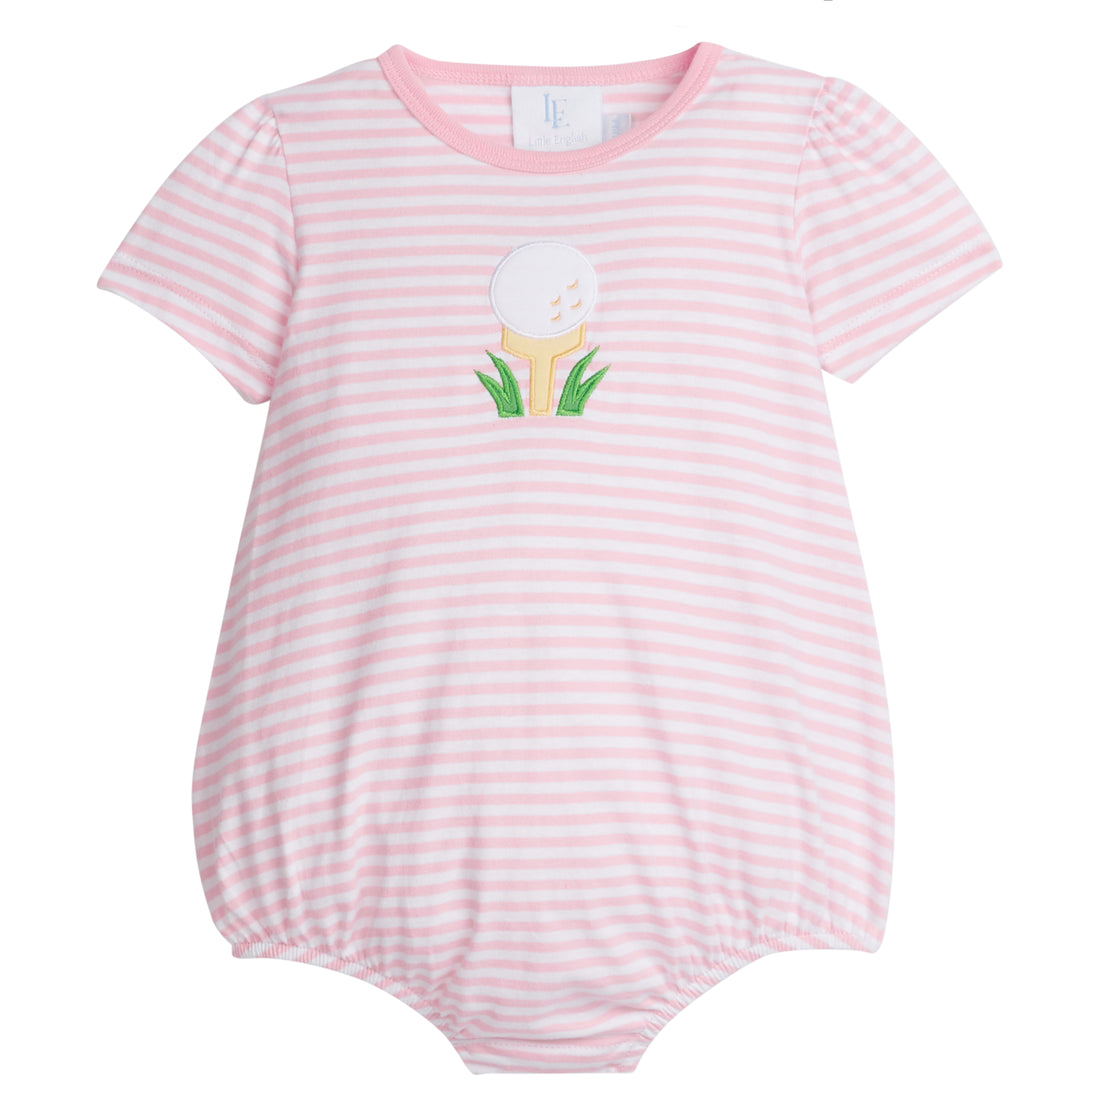 Little English classic children’s clothing, baby&